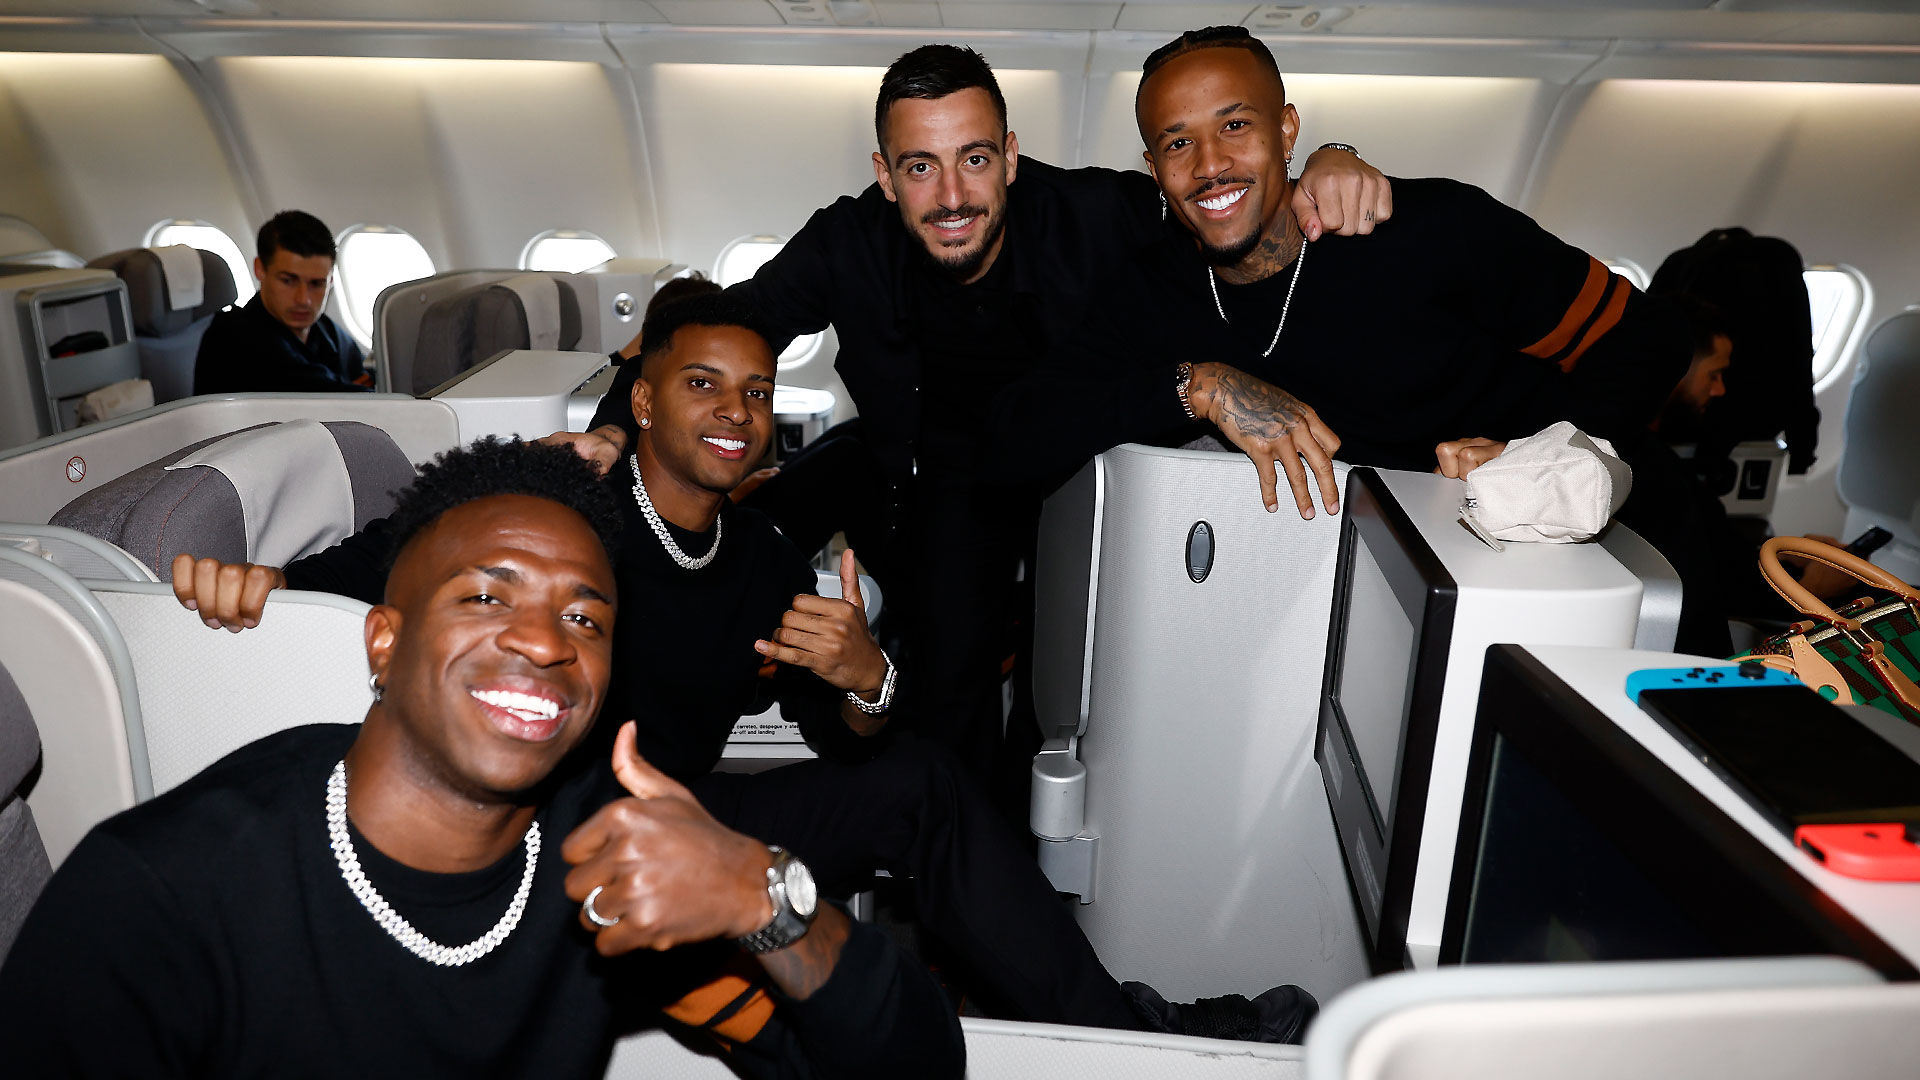 Real Madrid have arrived in Munich